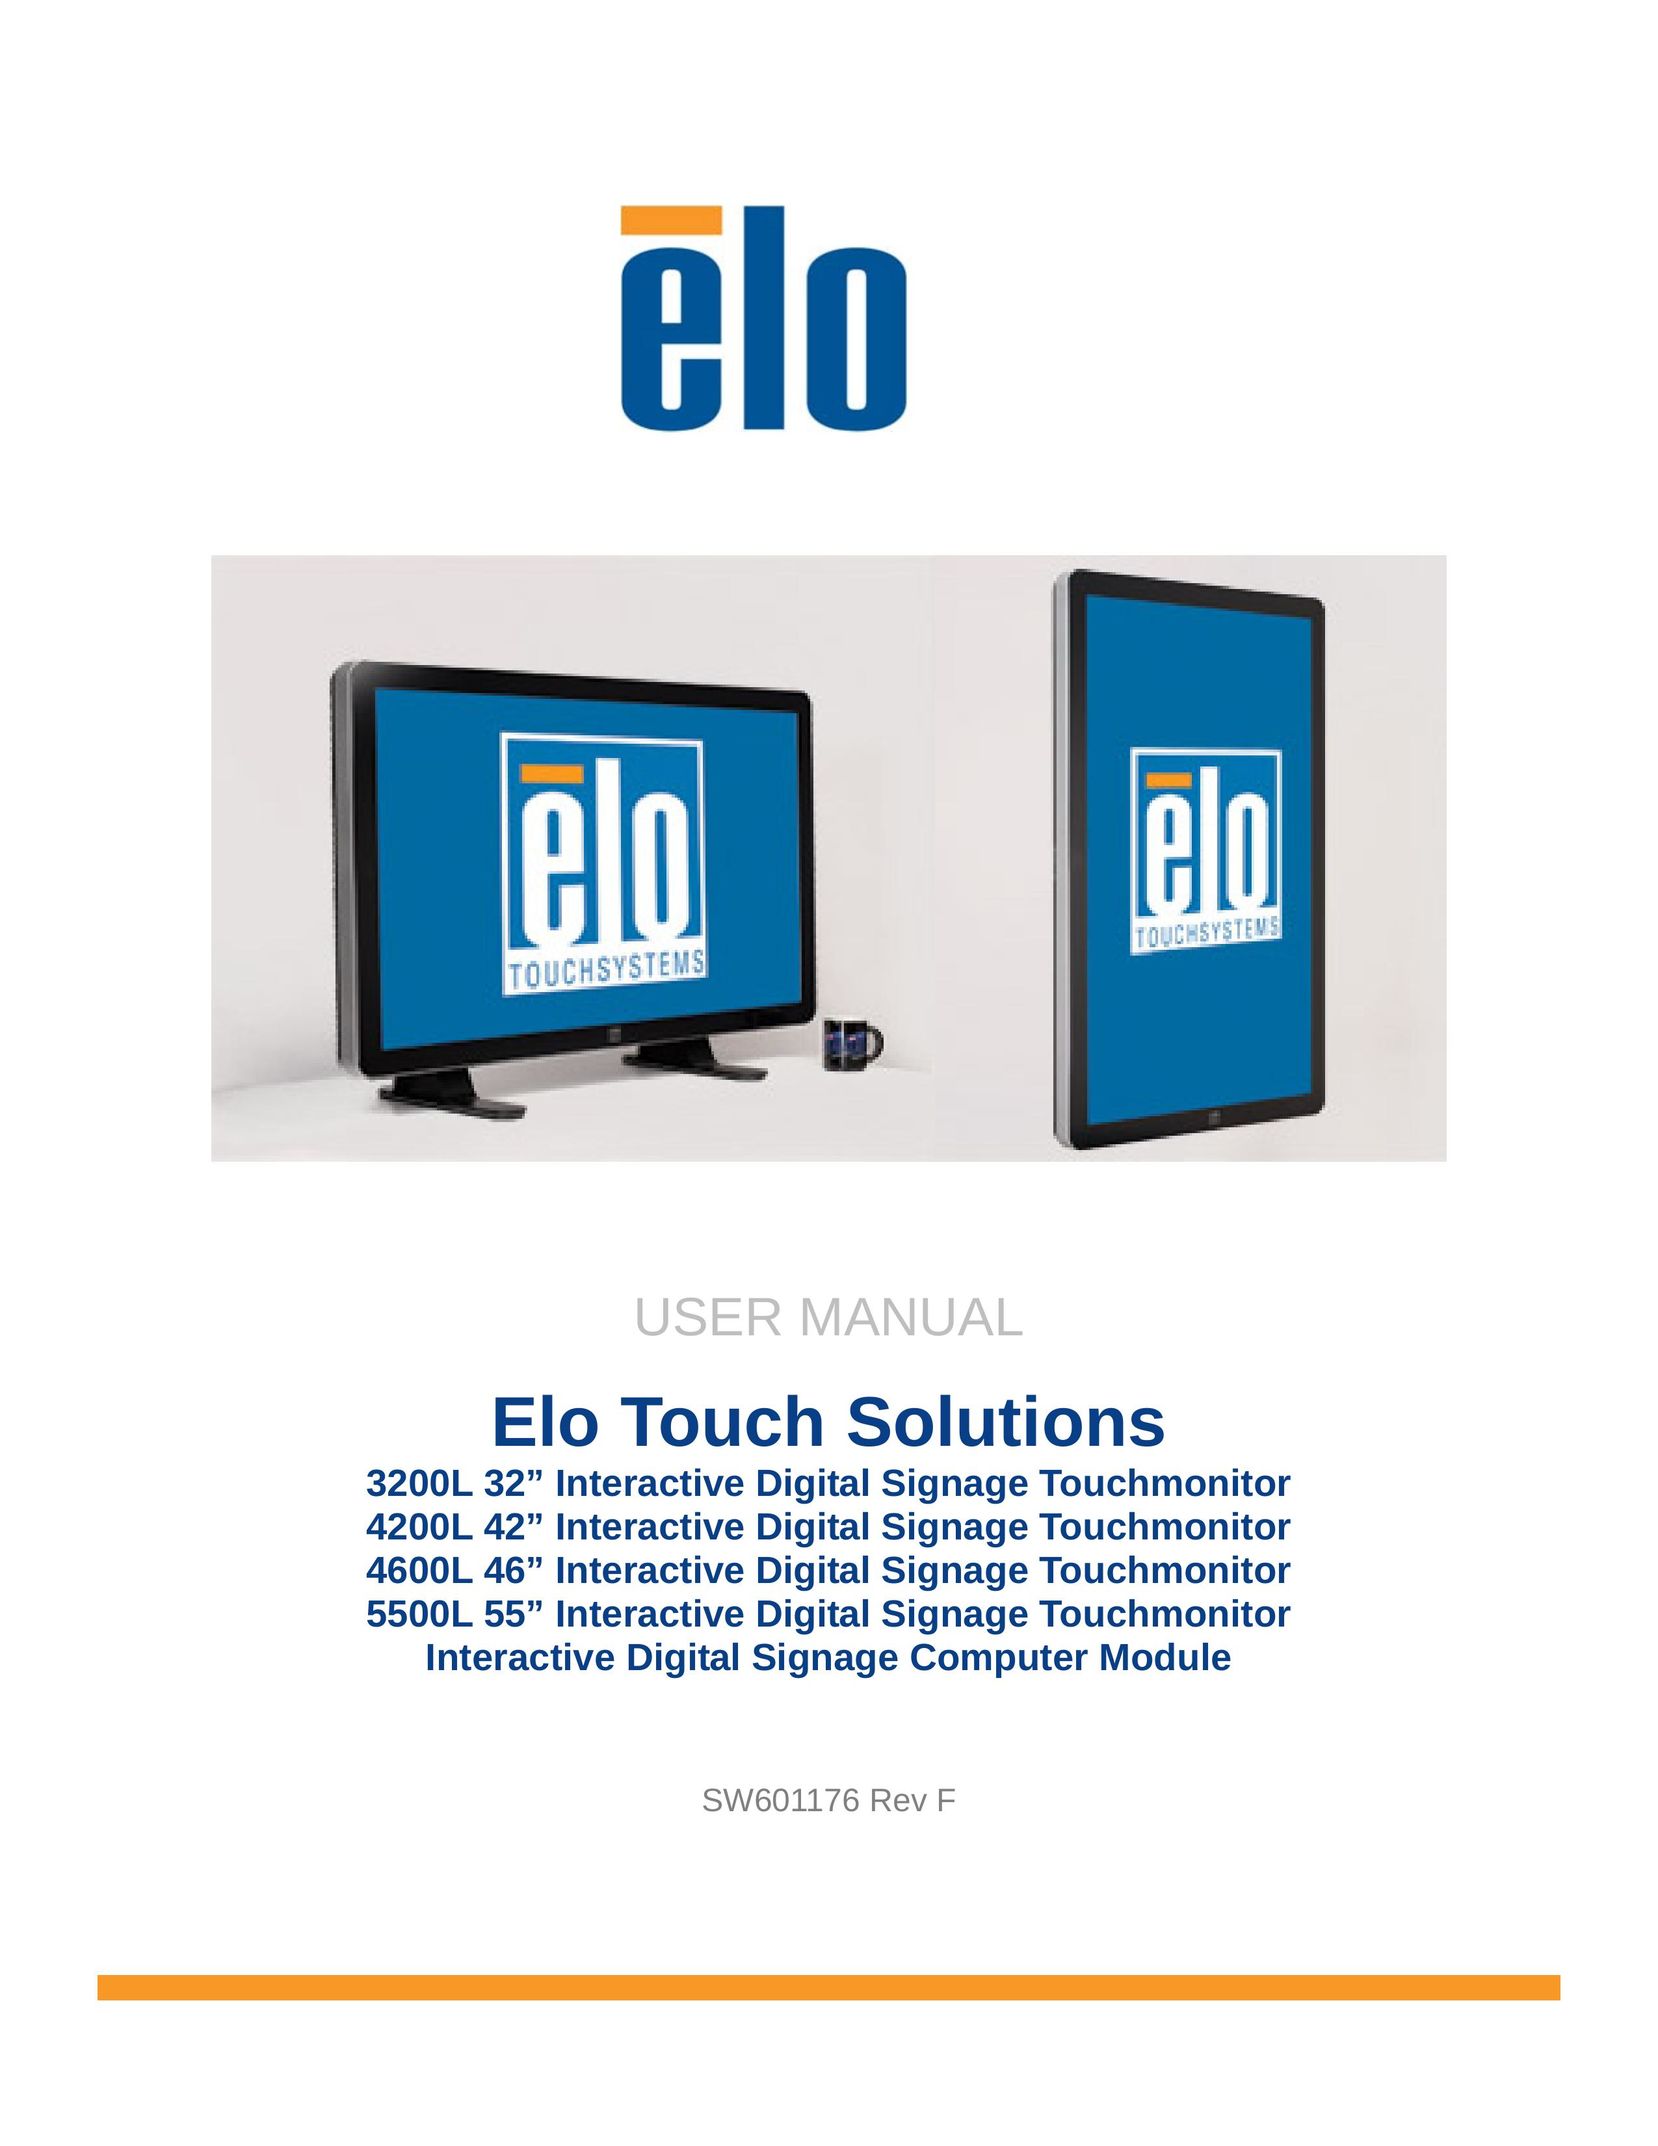 Elo TouchSystems 5500L Car Video System User Manual